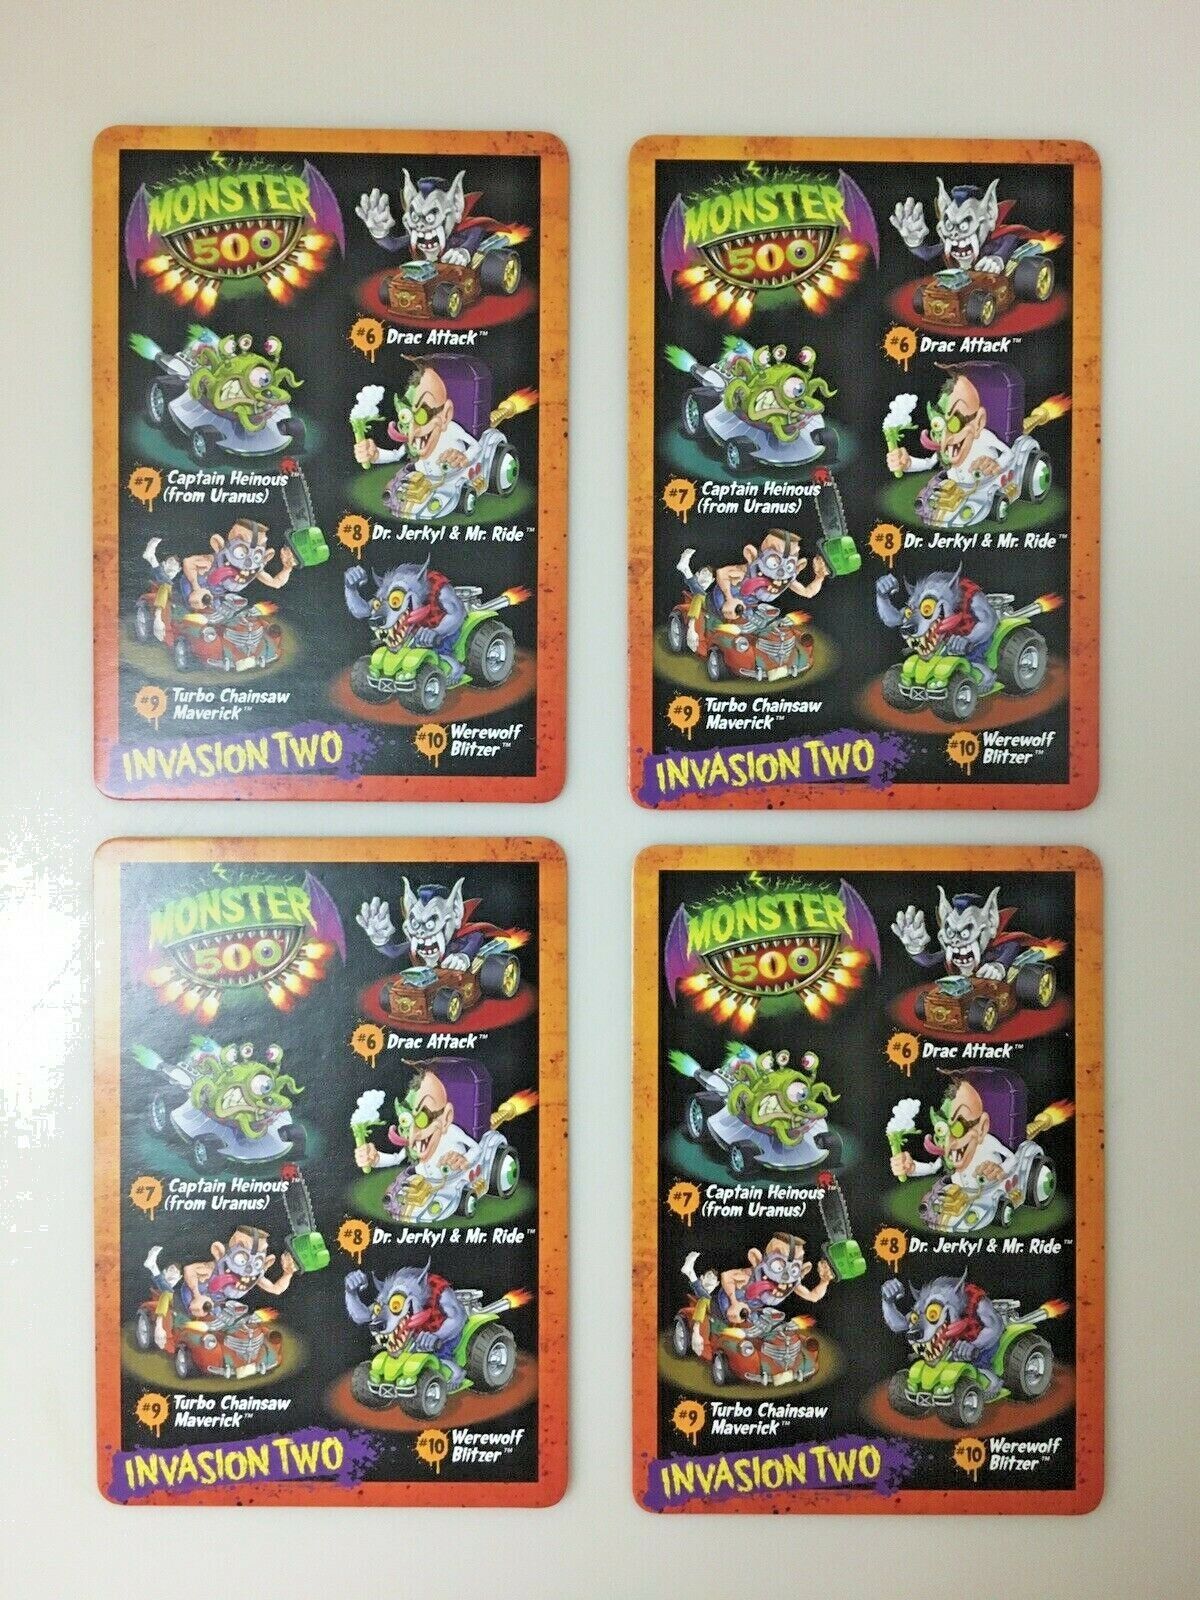 Monster 500 Promotional Card Lot of 4 cards Toys R Us Invasion Two Event  4 Same Monster 500